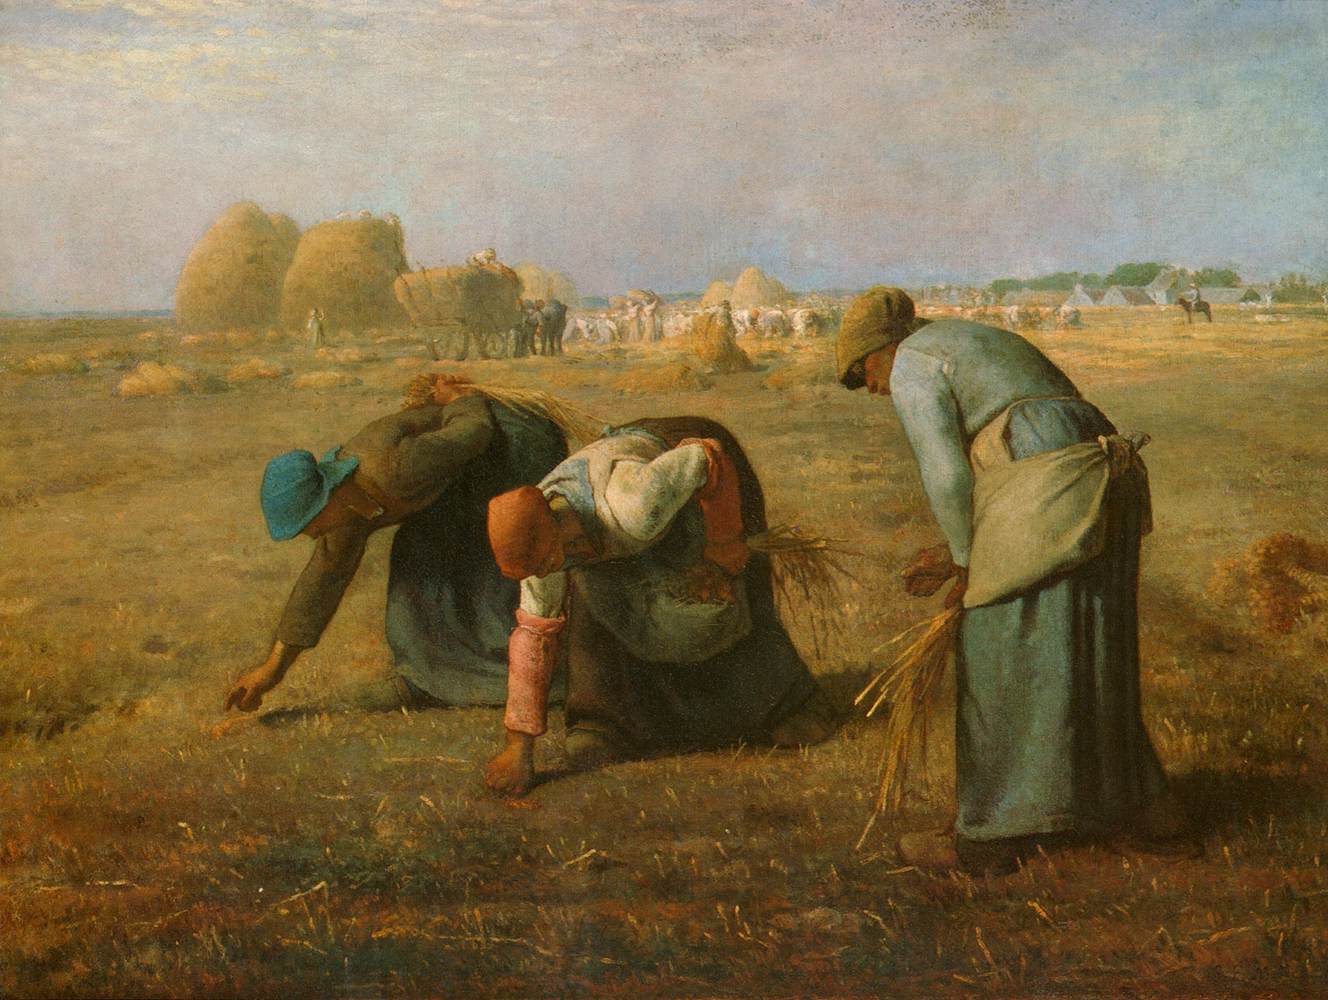 Jean Francois Millet, The Gleaners (1857) 